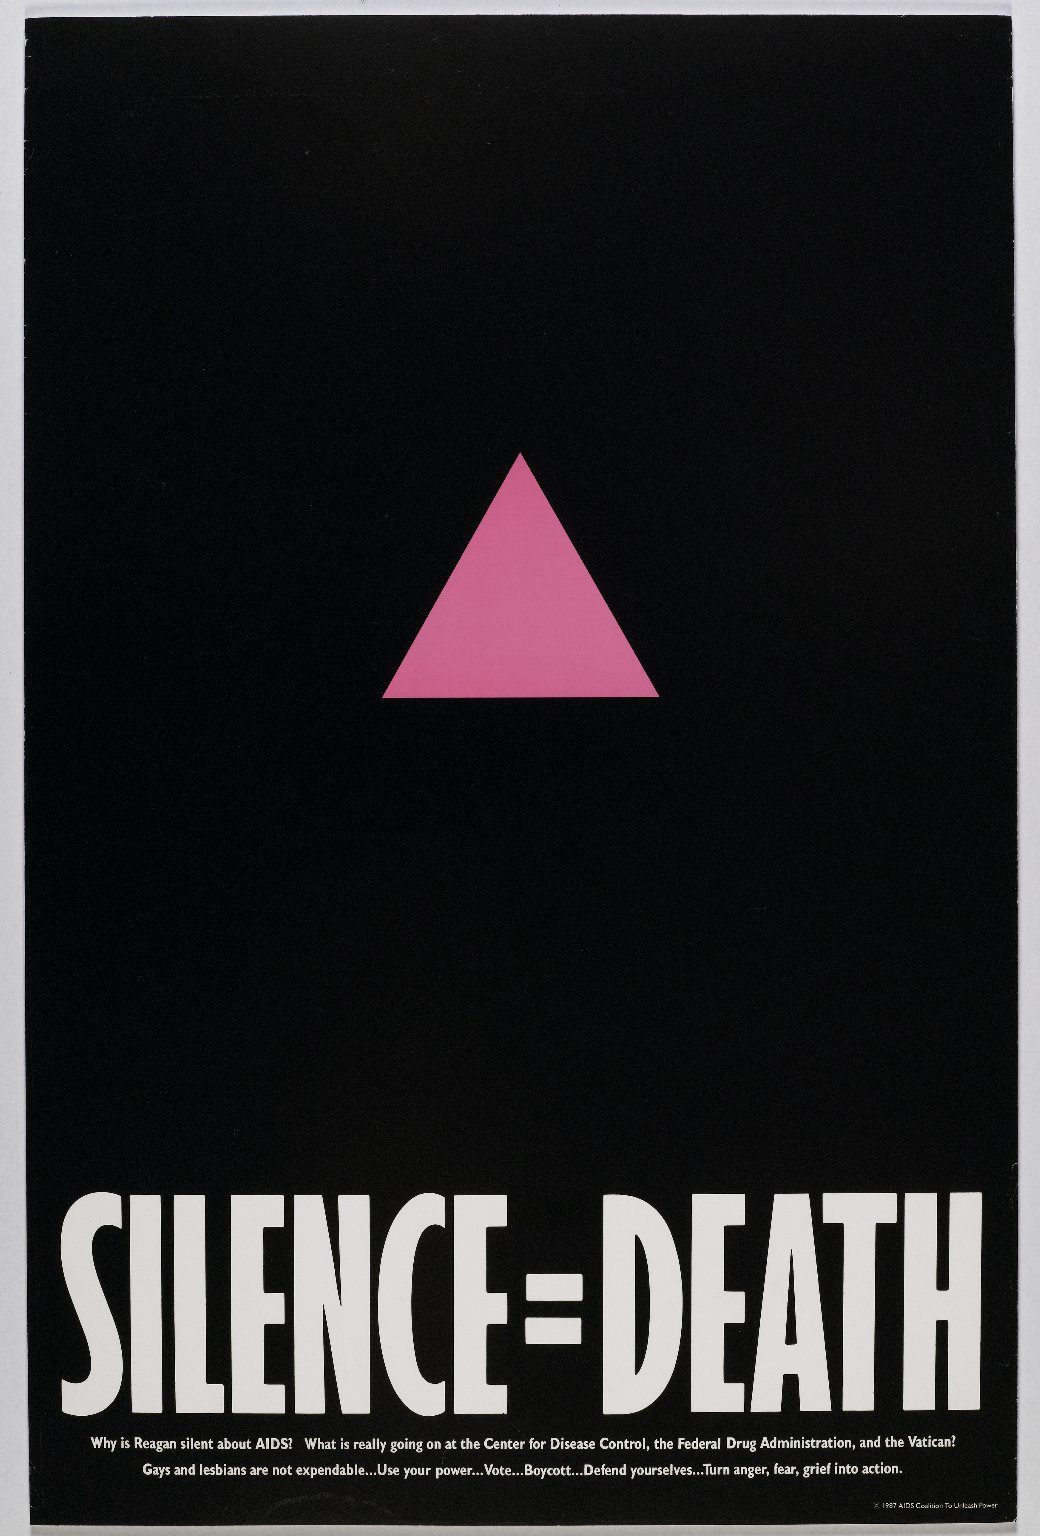 an image of a right-side up pink triangle on a black background. in large letters at the bottom it says'SILENCE=DEATH.' under that, it says in small letters 'why is reagan silent about AIDS? what is really going on at the center for disease control, the federal drug administration, and the vatican? gays and lesbians are not expendable... use your power... vote...boycott...defend yourselves...turn anger, fear, grief into action'